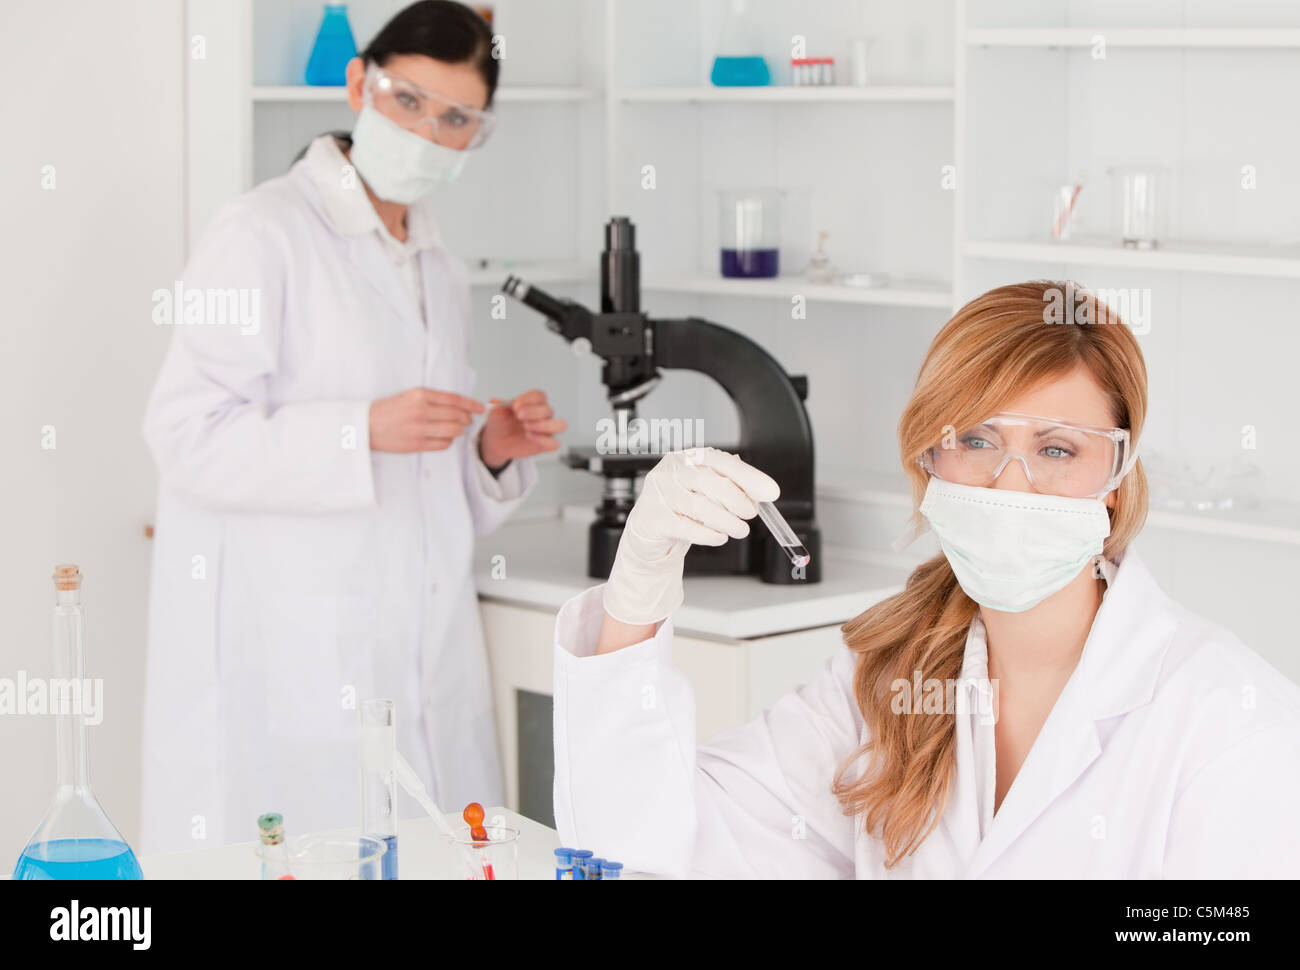 Dark-haired and blond scientists carrying out an experiment Stock Photo